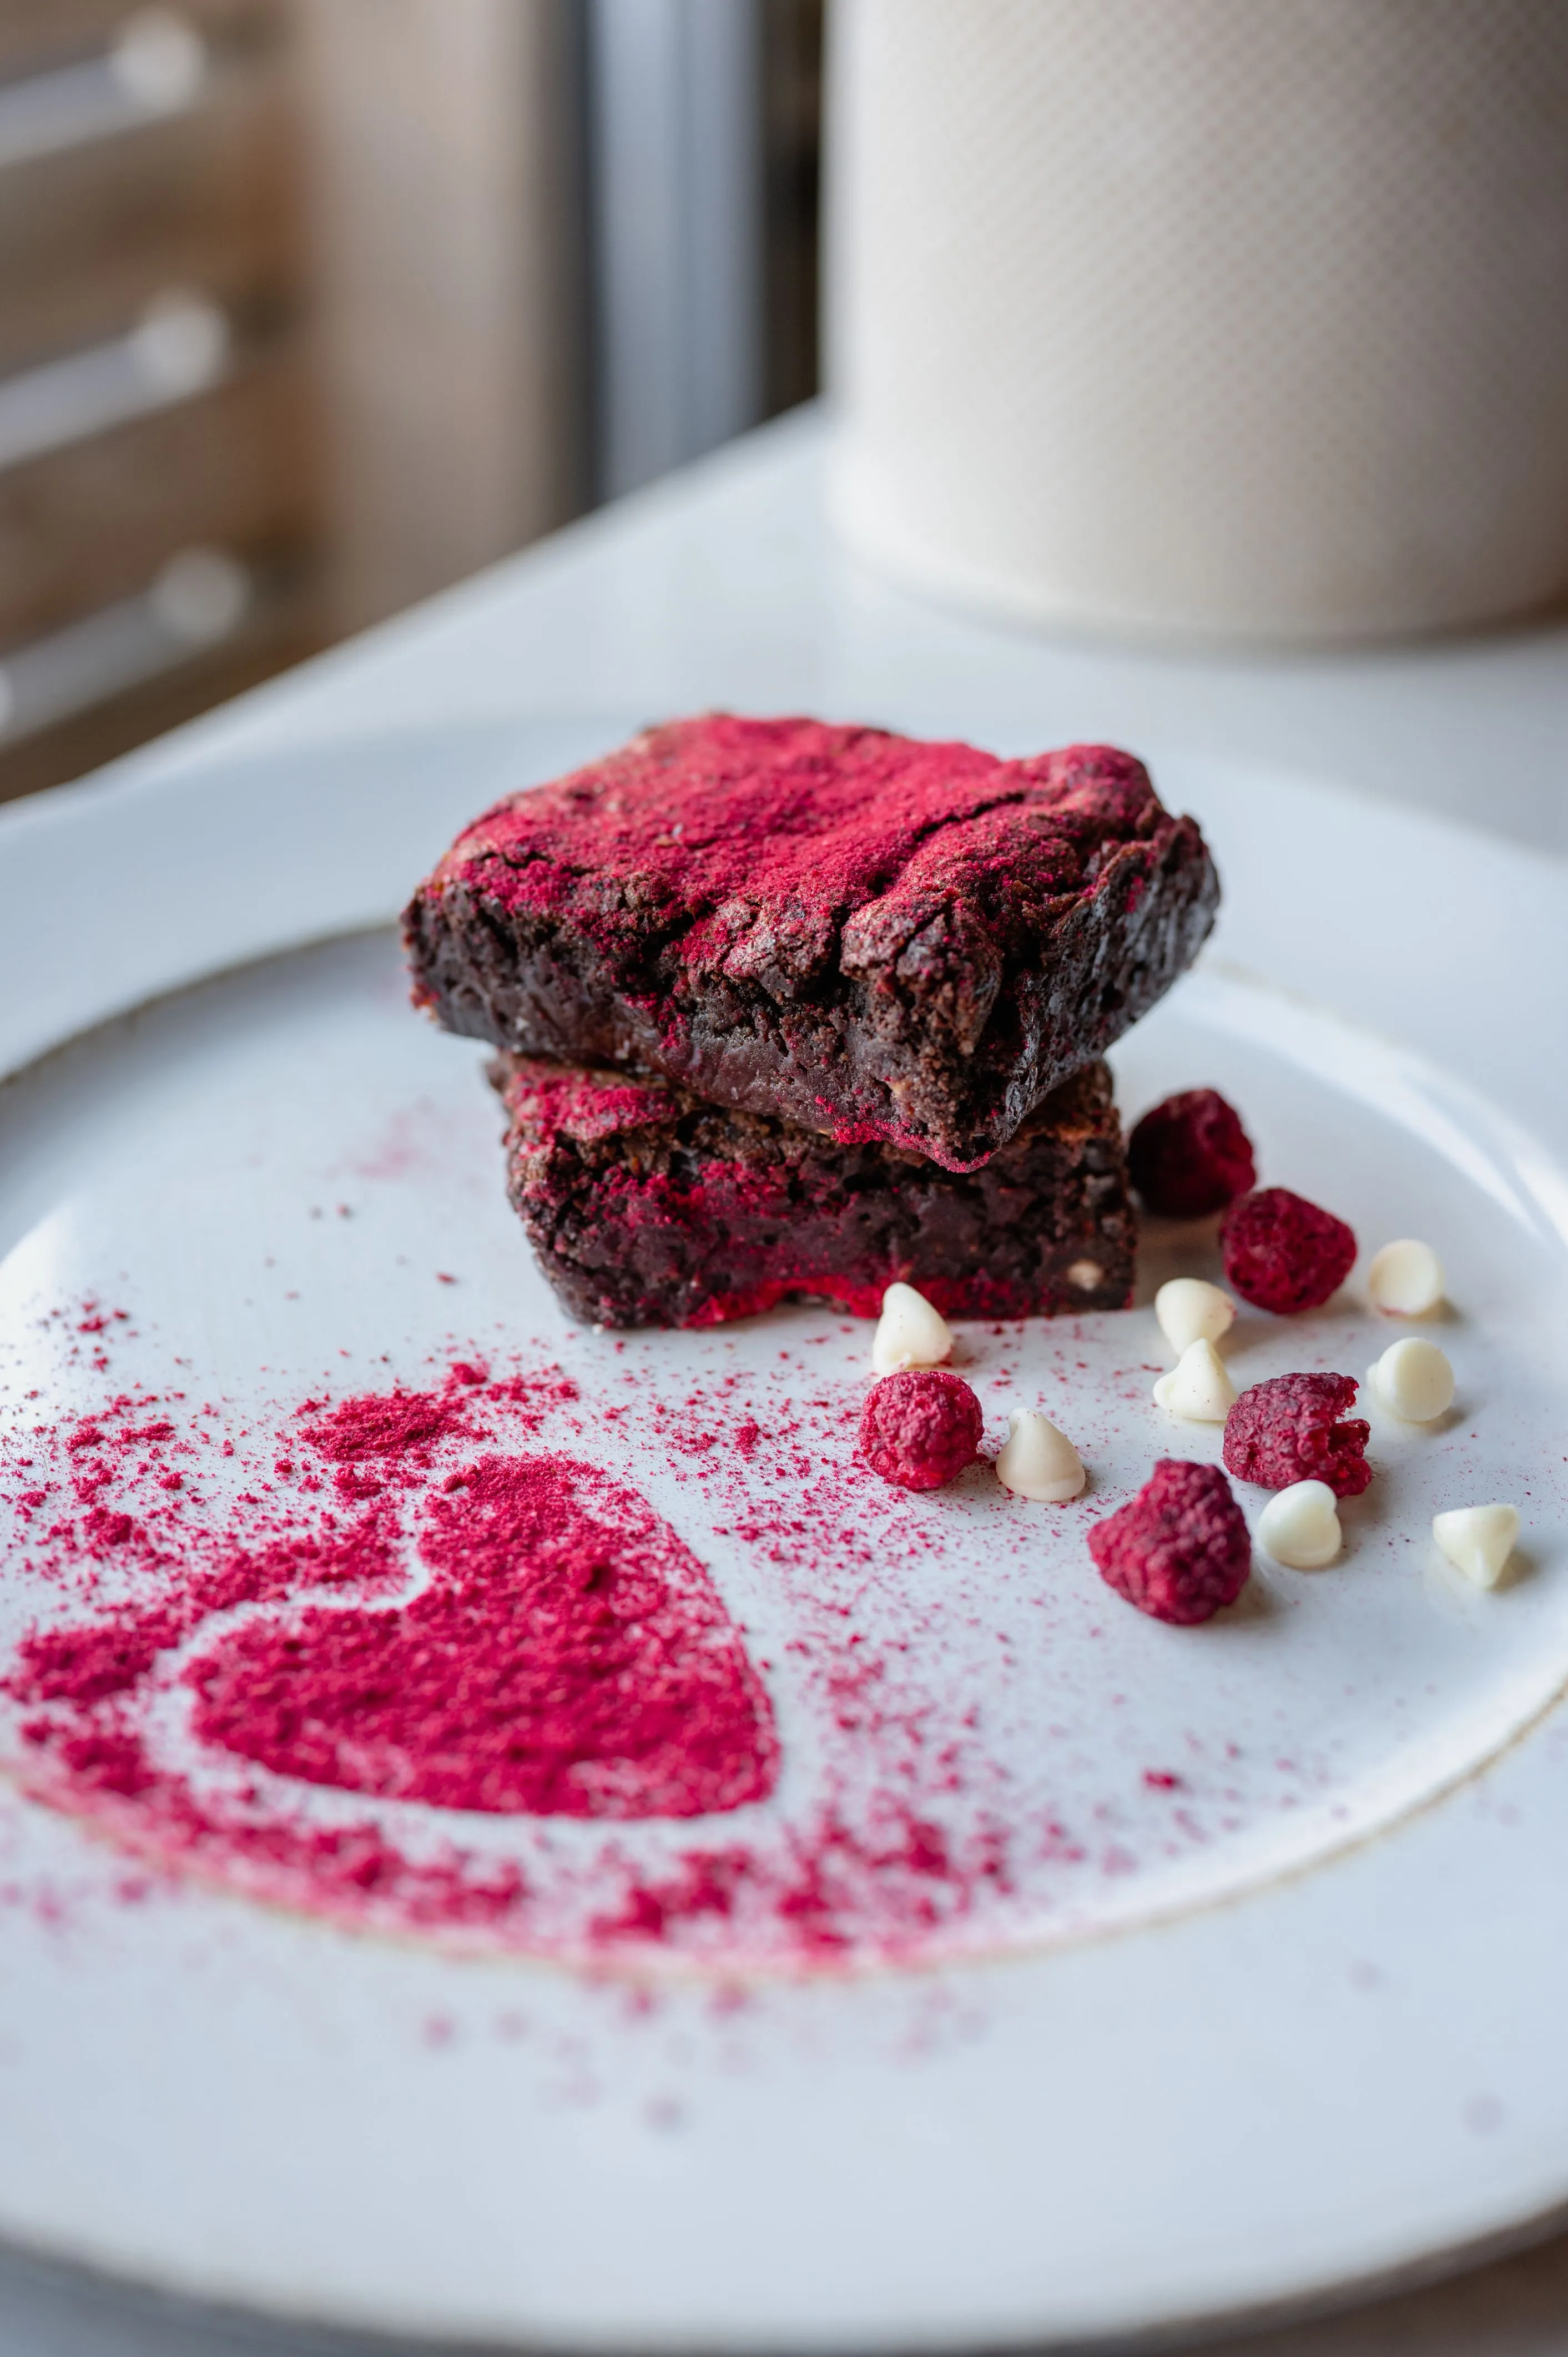 Two chocolate brownies dusted with red powder, served on a plate with a heart-shaped pattern and garnished with white chocolate drops and freeze-dried raspberries.